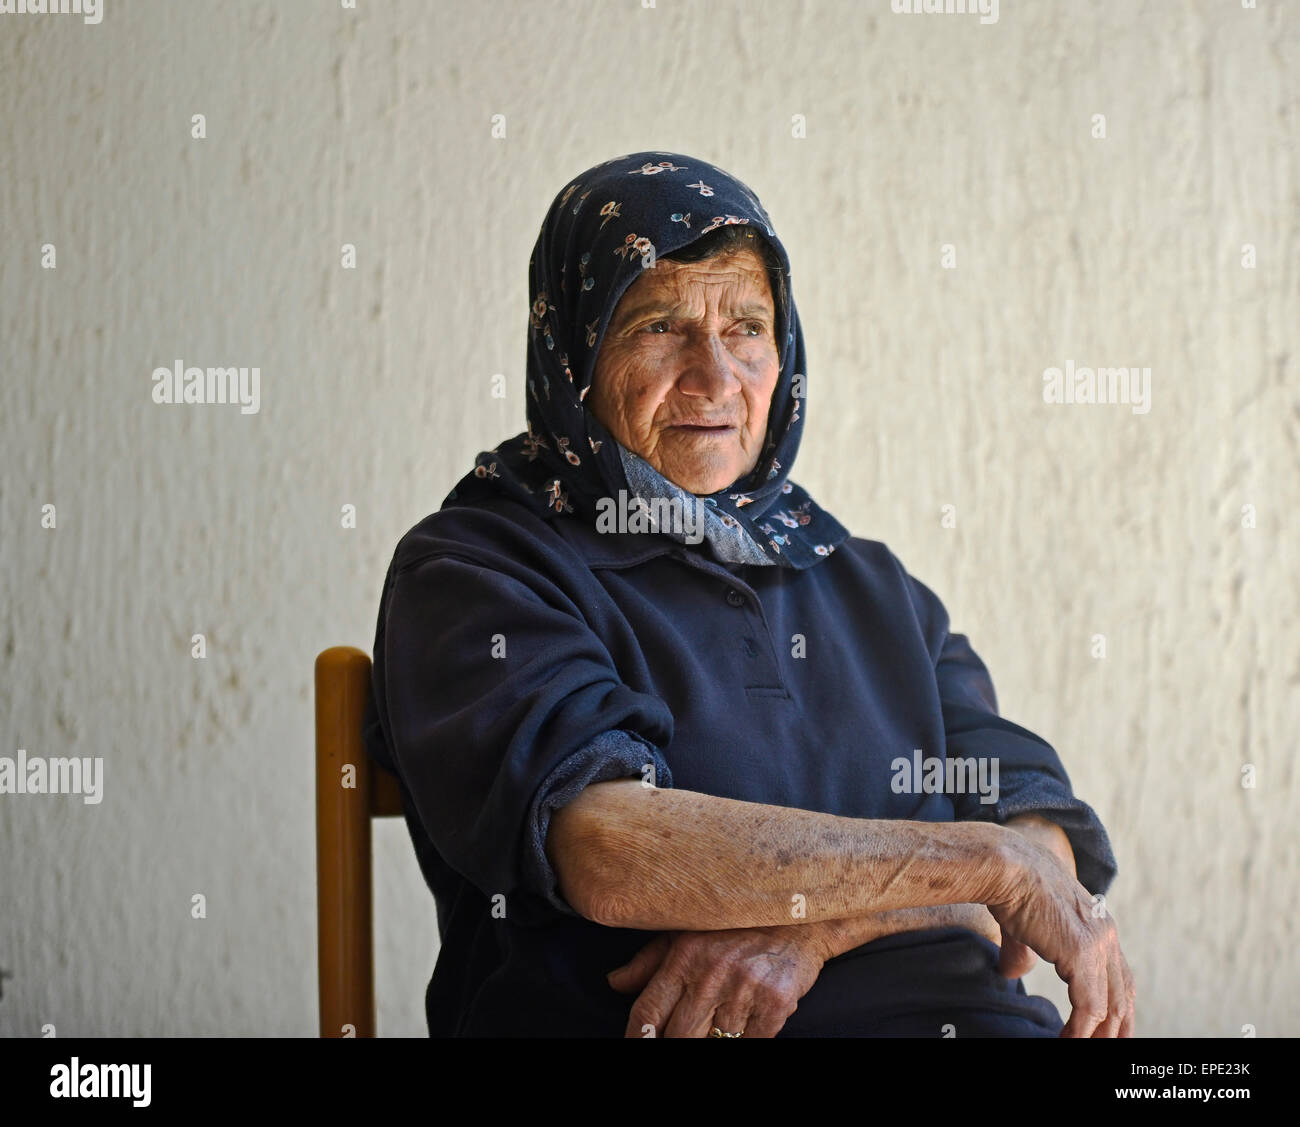 Greek Cypriot woman taking shelter from hot temperatures Stock Photo